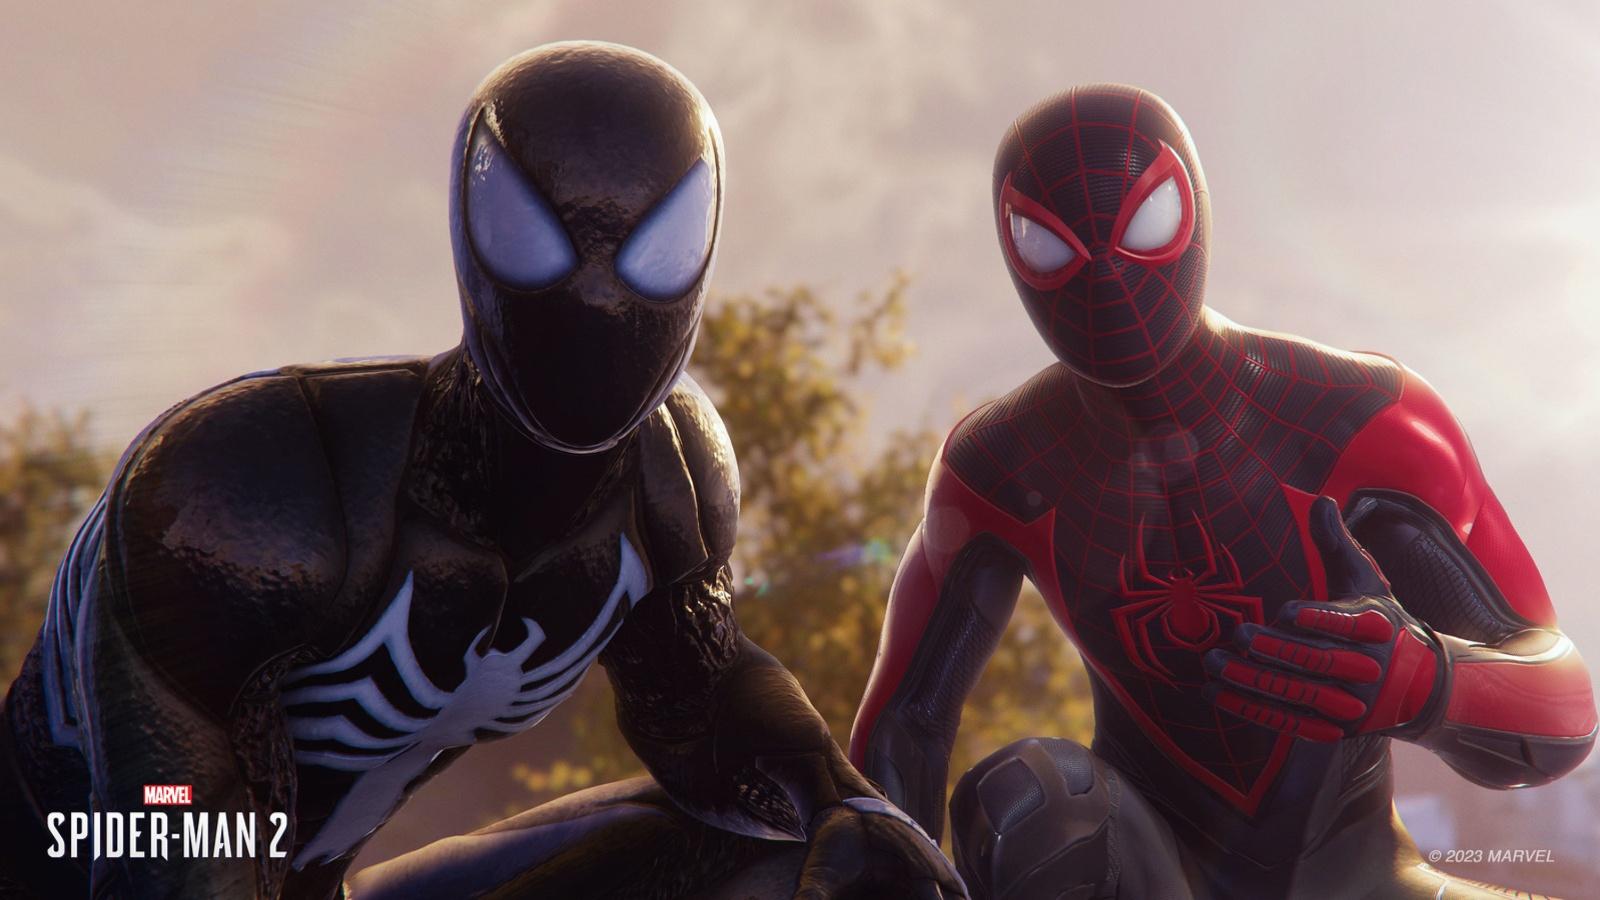 A screenshot from the game Marvel's Spider-Man 2